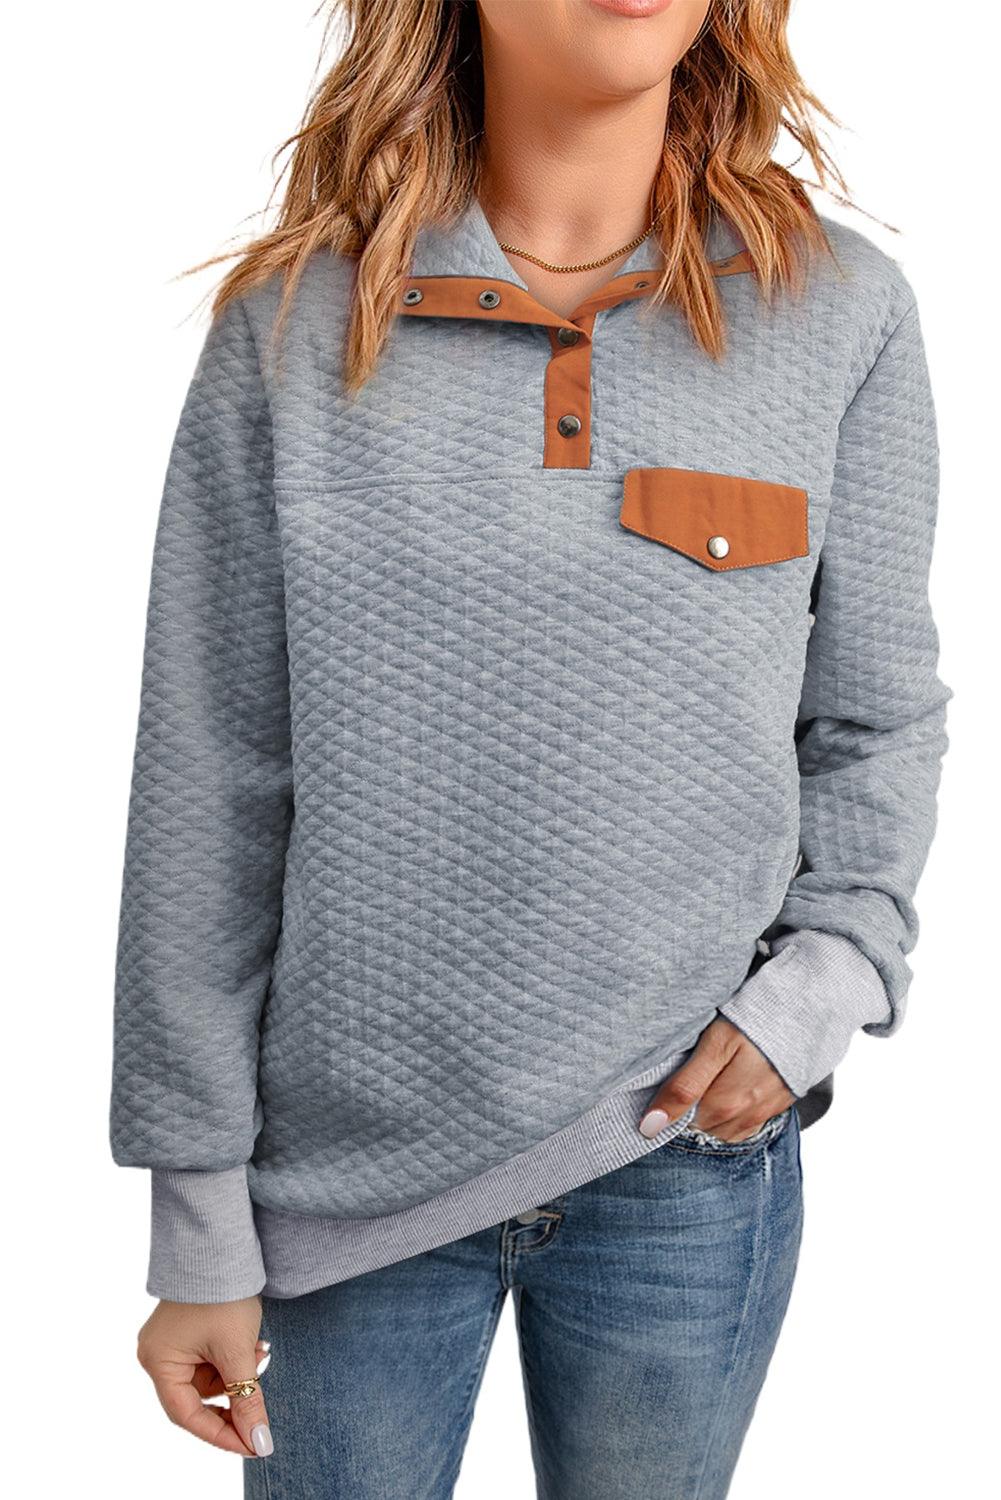 Dark Gray Quilted Snaps Stand Neck Sweatshirt with Fake Front Pocket - L & M Kee, LLC